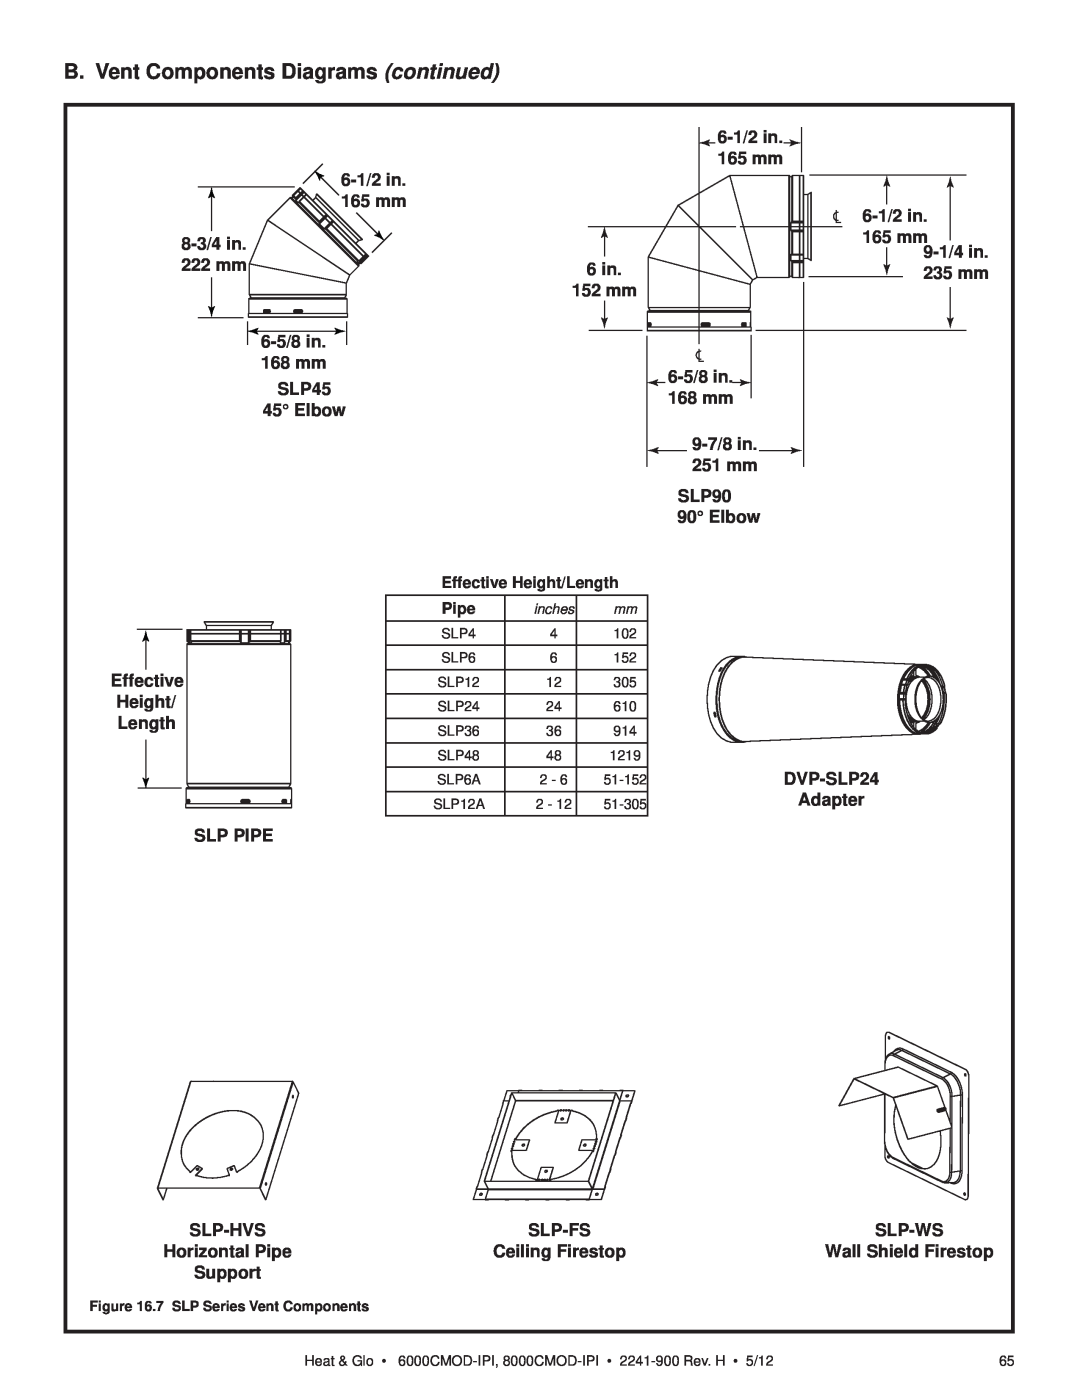 Heat & Glo LifeStyle 6000CMOD-IPI B. Vent Components Diagrams continued, 8-3/4in 222 mm, 6-1/2in, 165 mm, 6 in, 235 mm 